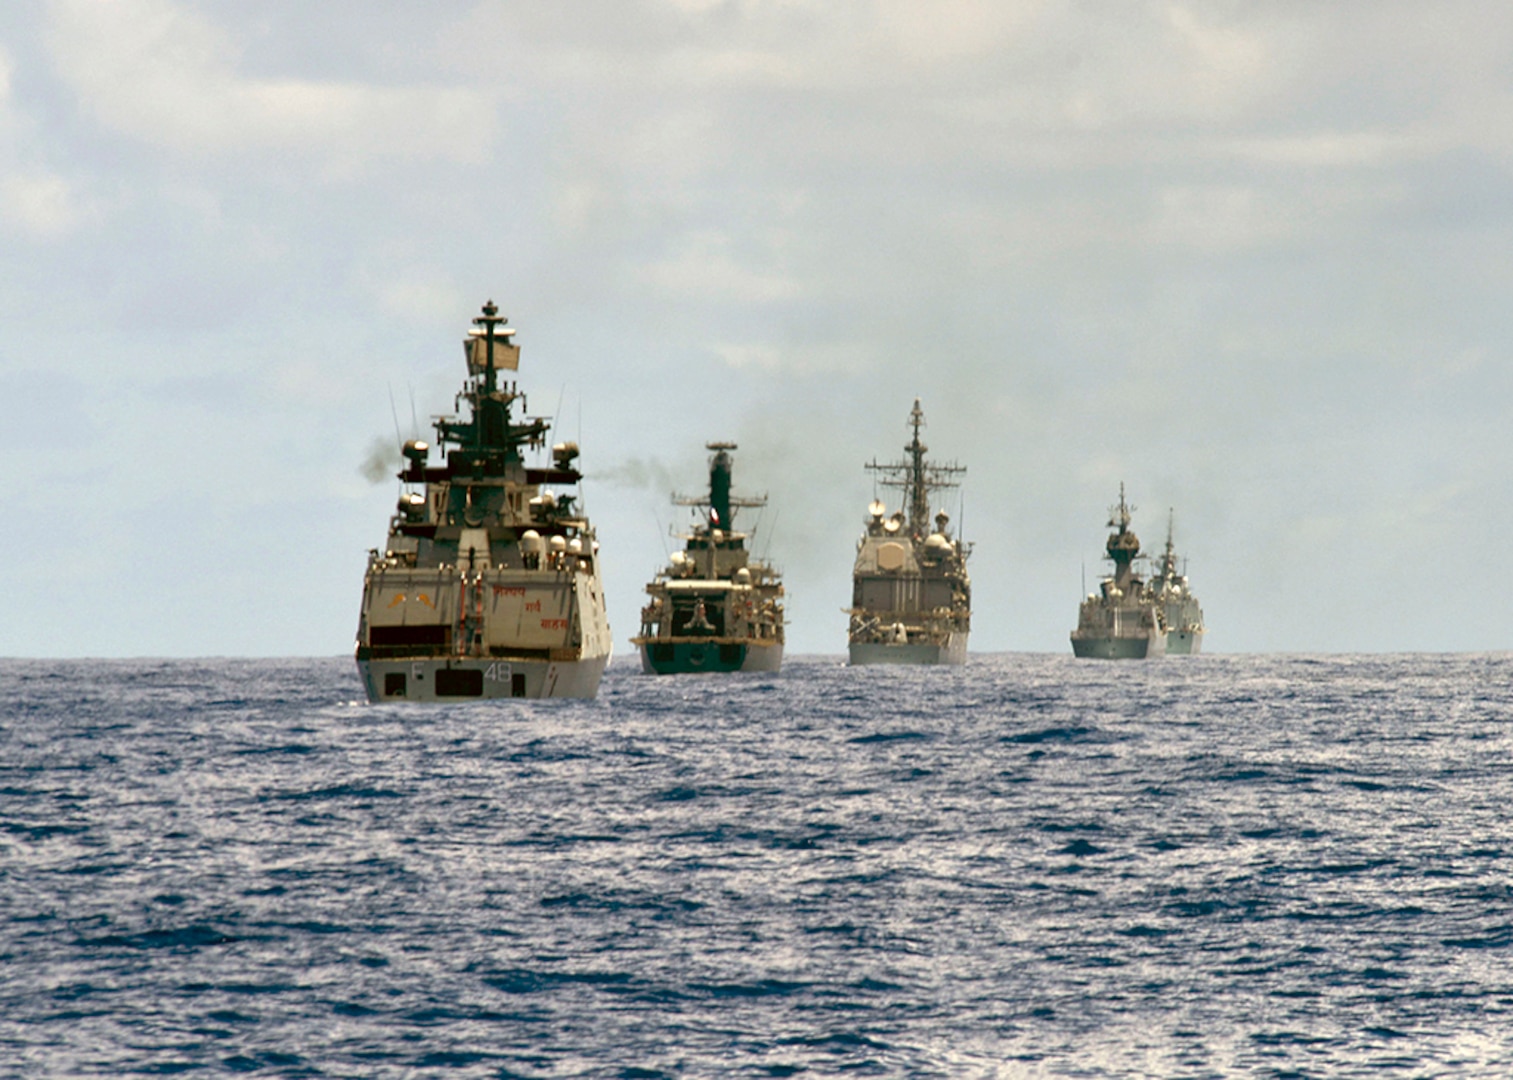 (July 18, 2016) - The HMAS Ballarat (FFH 155), USS Mobile Bay (CG 53), CNS Cochrane (FF 05) INS Satpura (F48), HMCS Calgary (FFH 335), and USS Shoup (DDG 35) steam in formation in preparation for a live fire exercise during Rim of the Pacific 2016. Twenty-six nations, more than 40 ships and submarines, more than 200 aircraft and 25,000 personnel are participating in RIMPAC from June 30 to Aug. 4, in and around the Hawaiian Islands and Southern California.  The world's largest international maritime exercise, RIMPAC provides a unique training opportunity that helps participants foster and sustain the cooperative relationships that are critical to ensuring the safety of sea lanes and security on the world's oceans. RIMPAC 2016 is the 25th exercise in the series that began in 1971. 